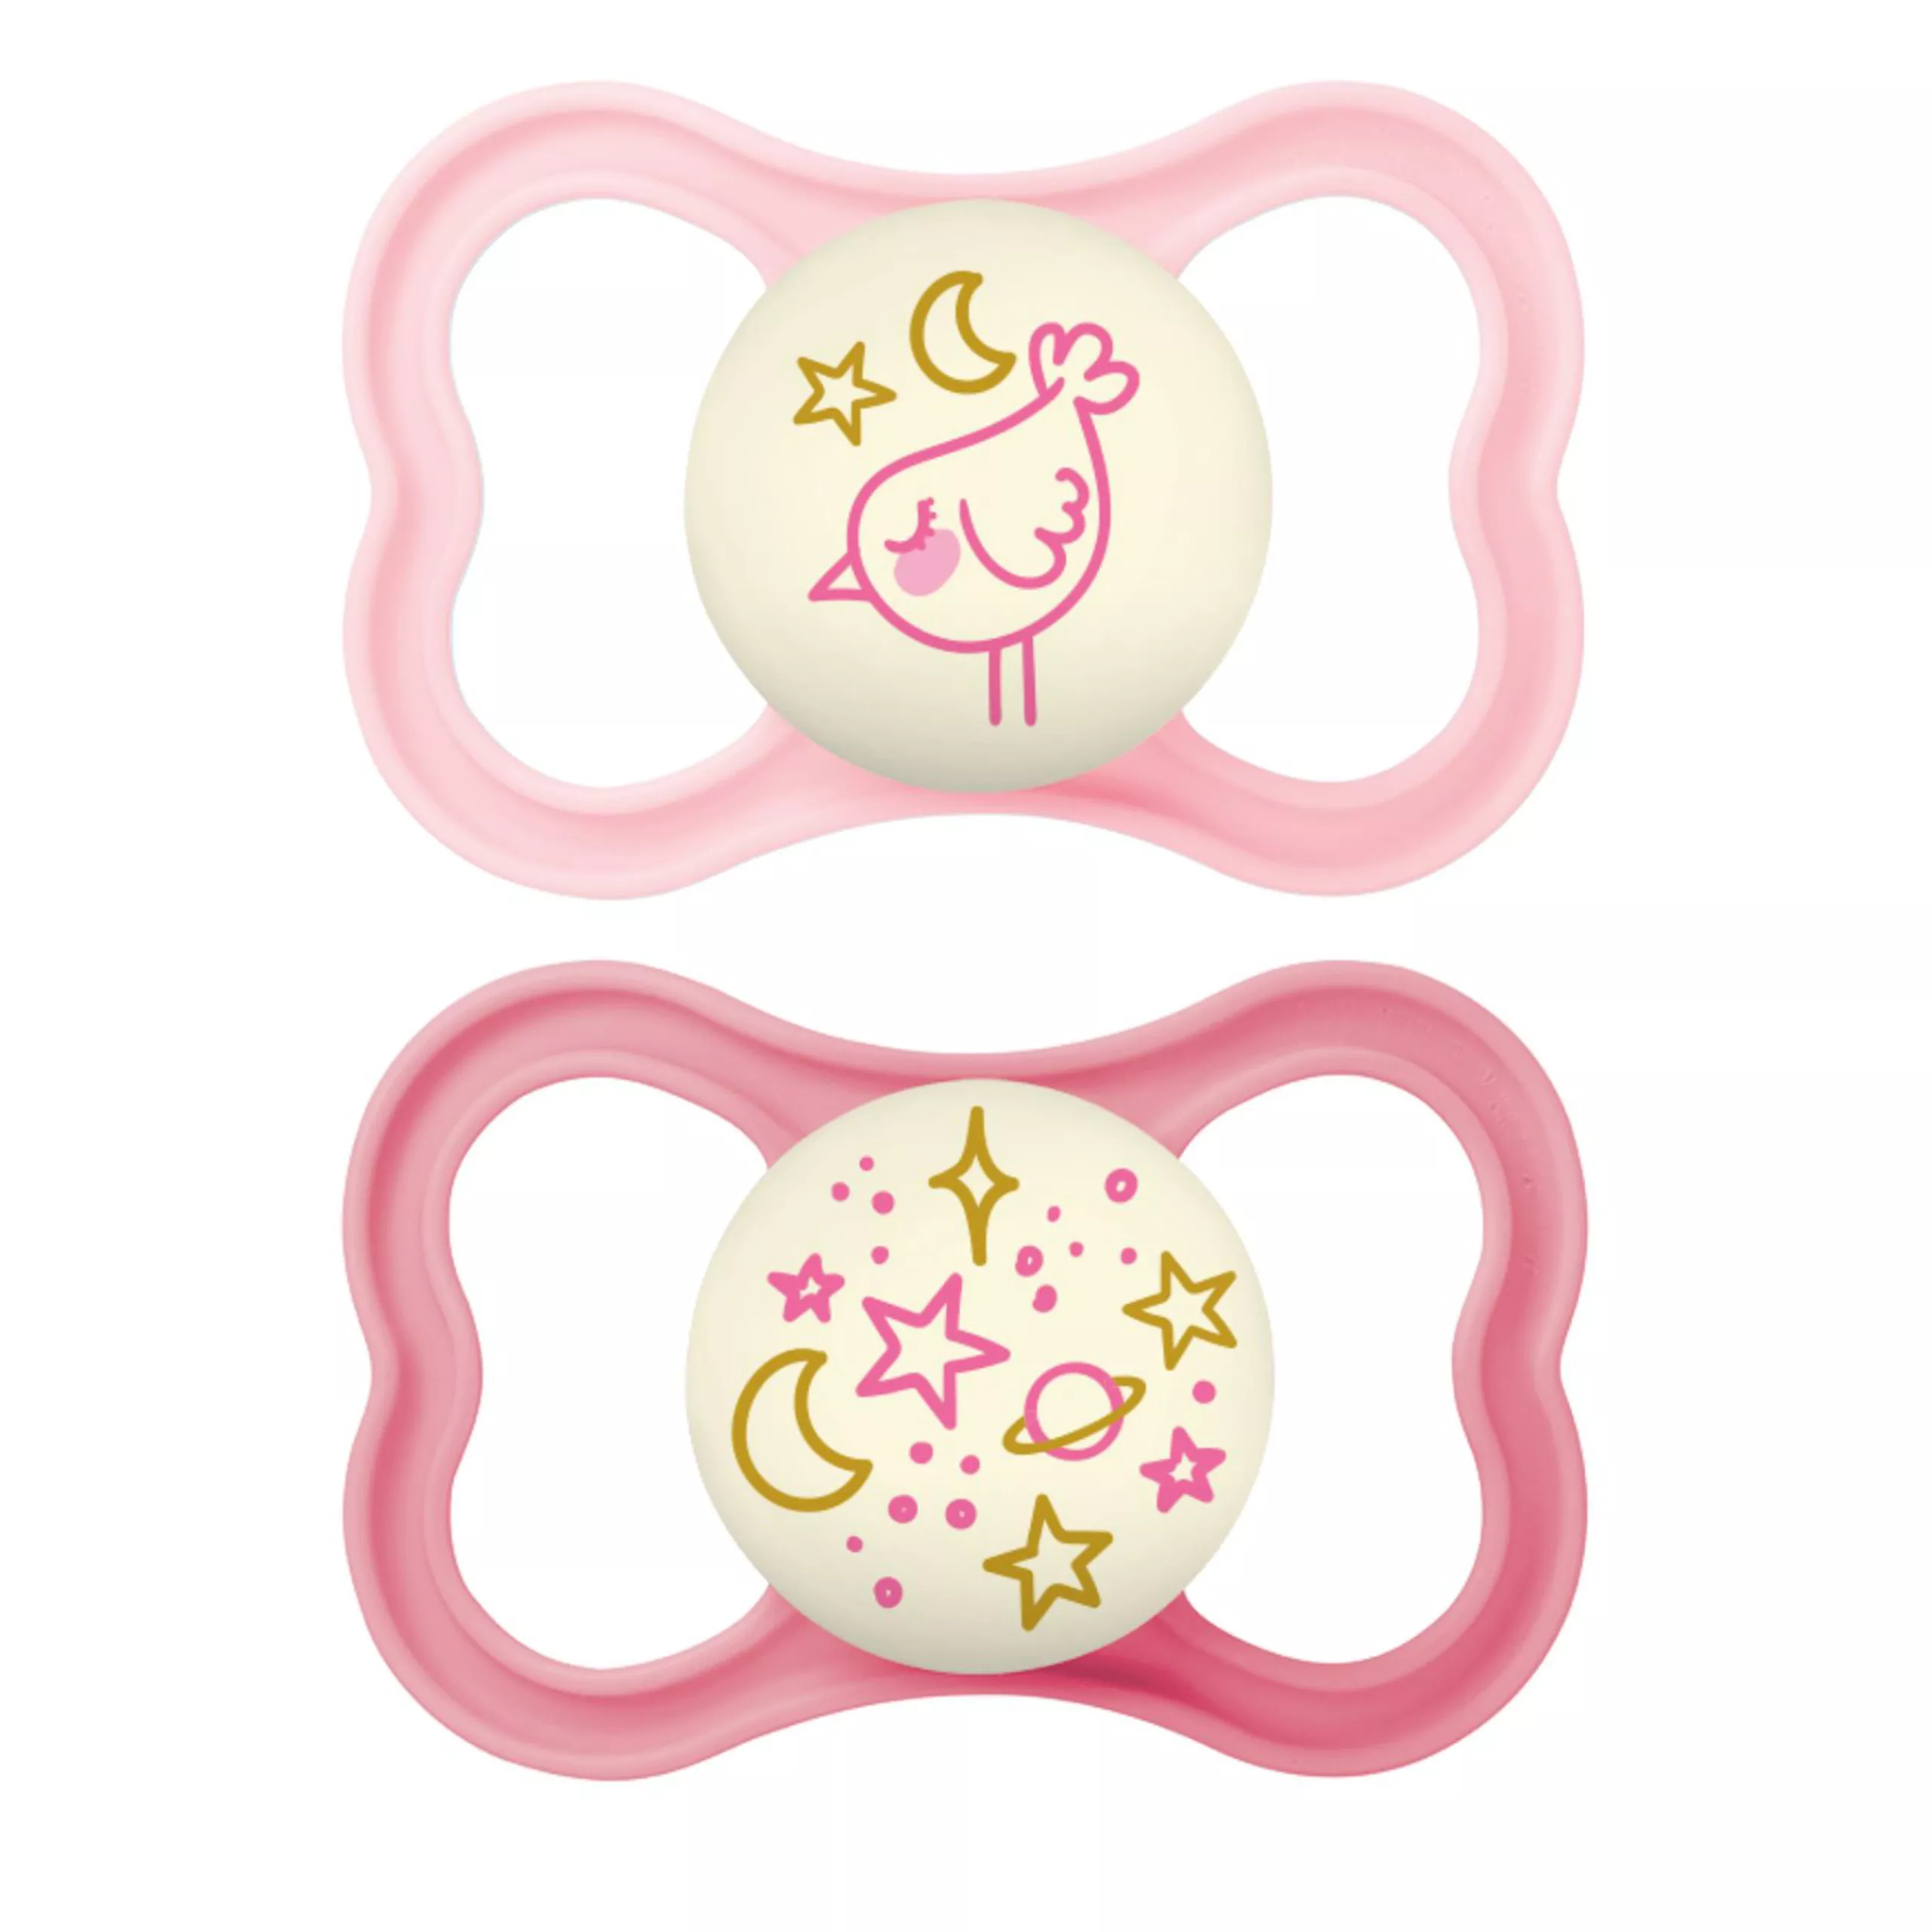 MAM Supreme Night Pacifiers 2 pack, 16+ Months